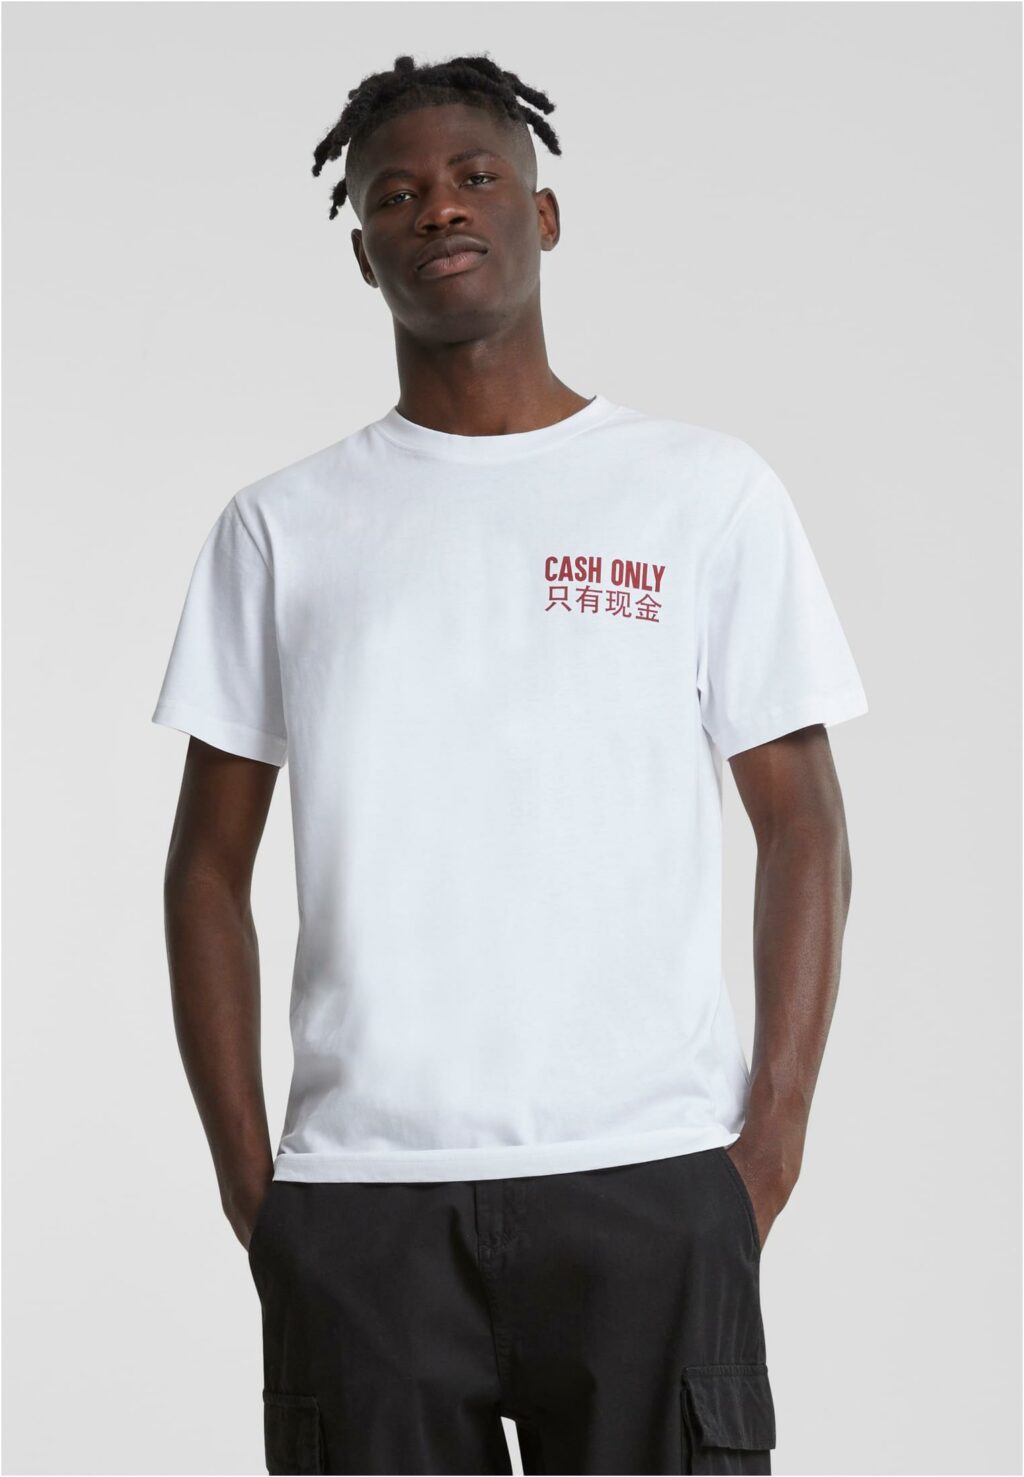 Cash Only Tee white MT816